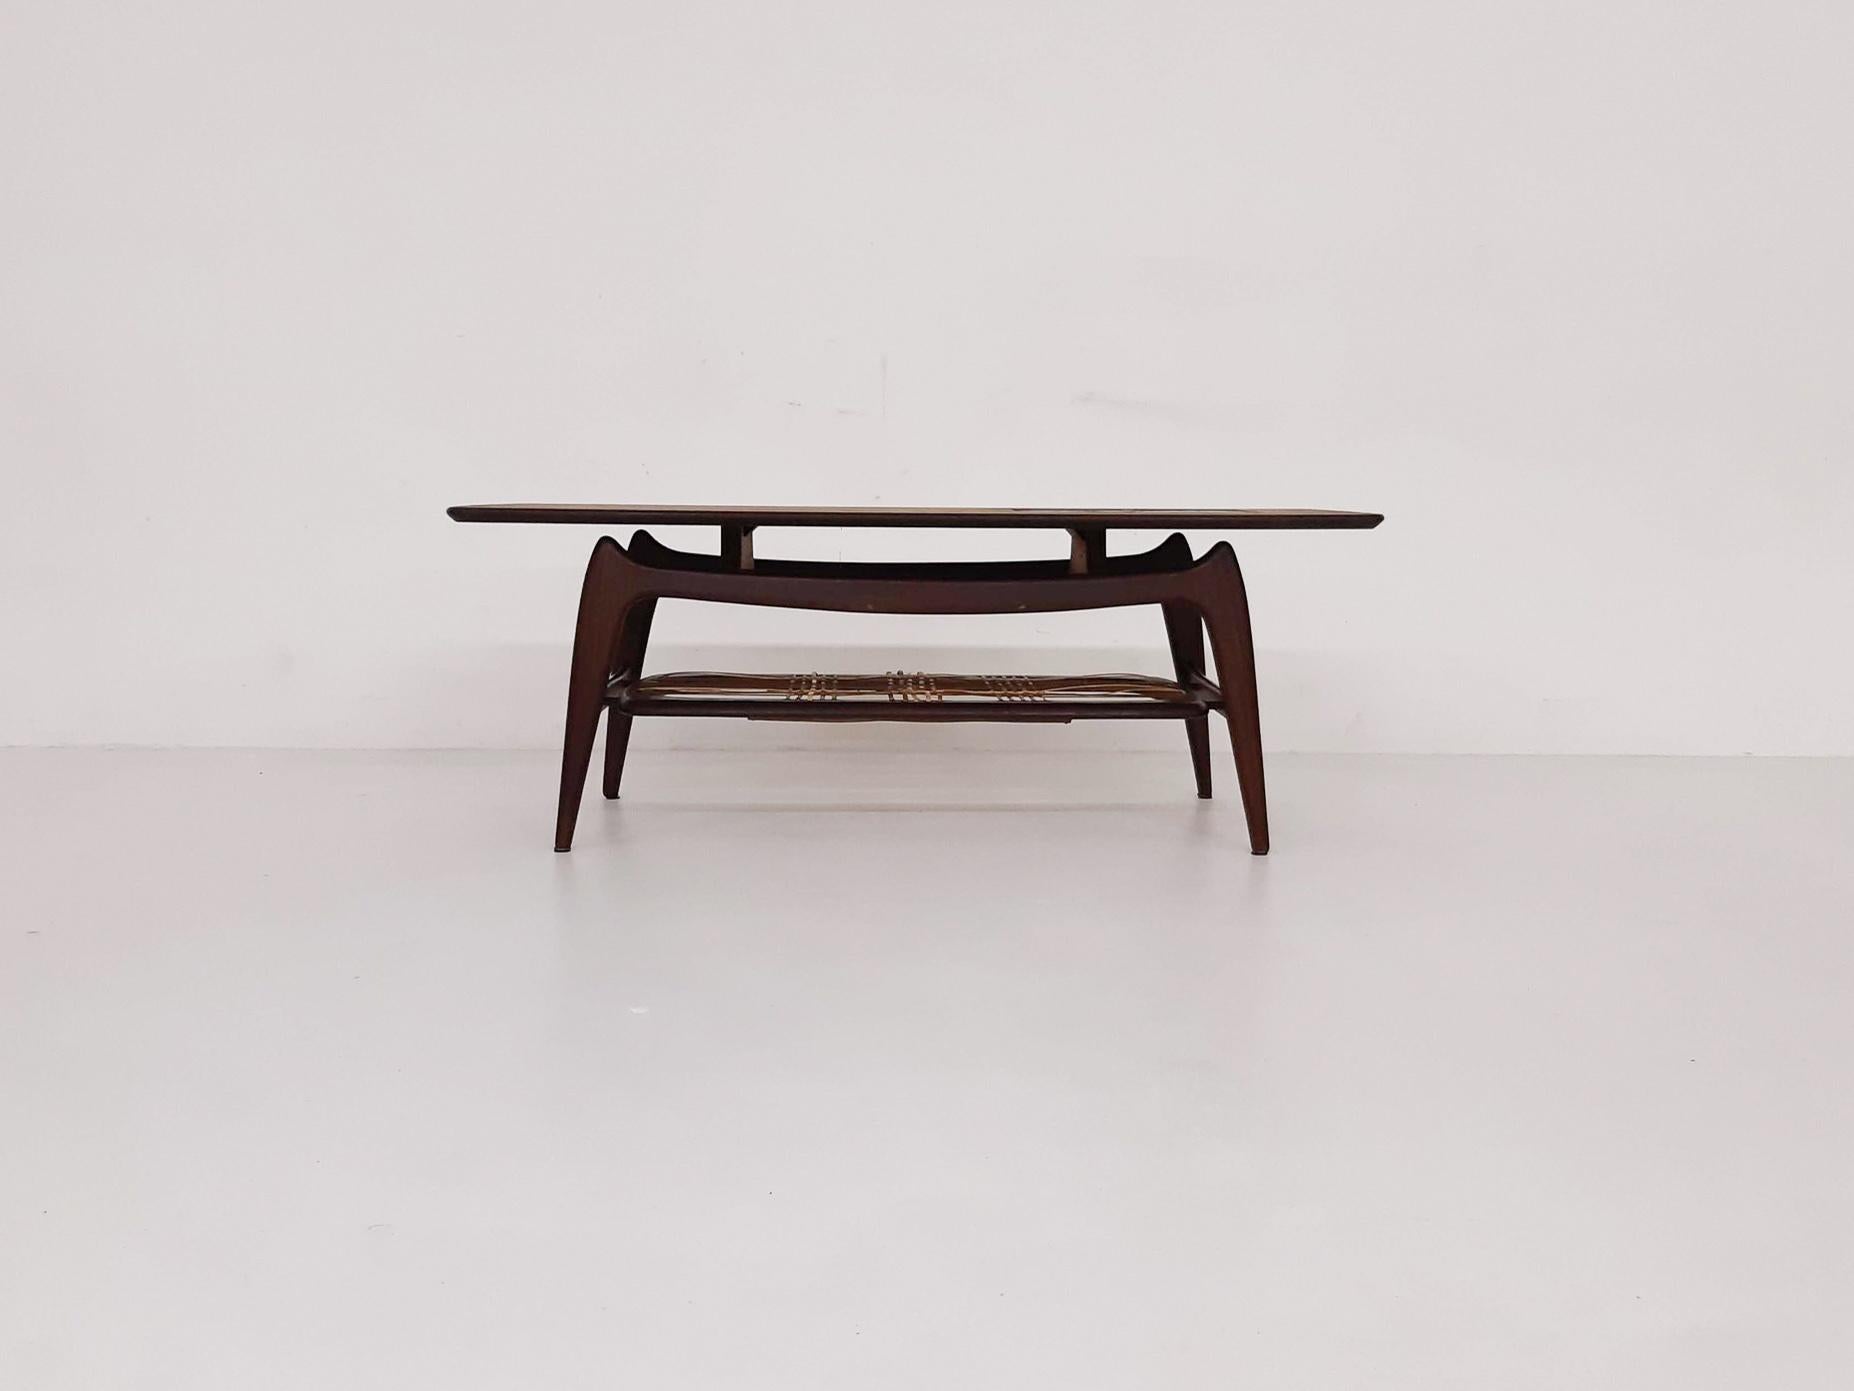 Wooden coffee table with Ravelli tiles on the top
A rattan magazine rack under the top. Some of the rattan strings have been replaced with new weaving.

Louis Van Teeffelen was the most important designer at Wébé. His work was often influenced by